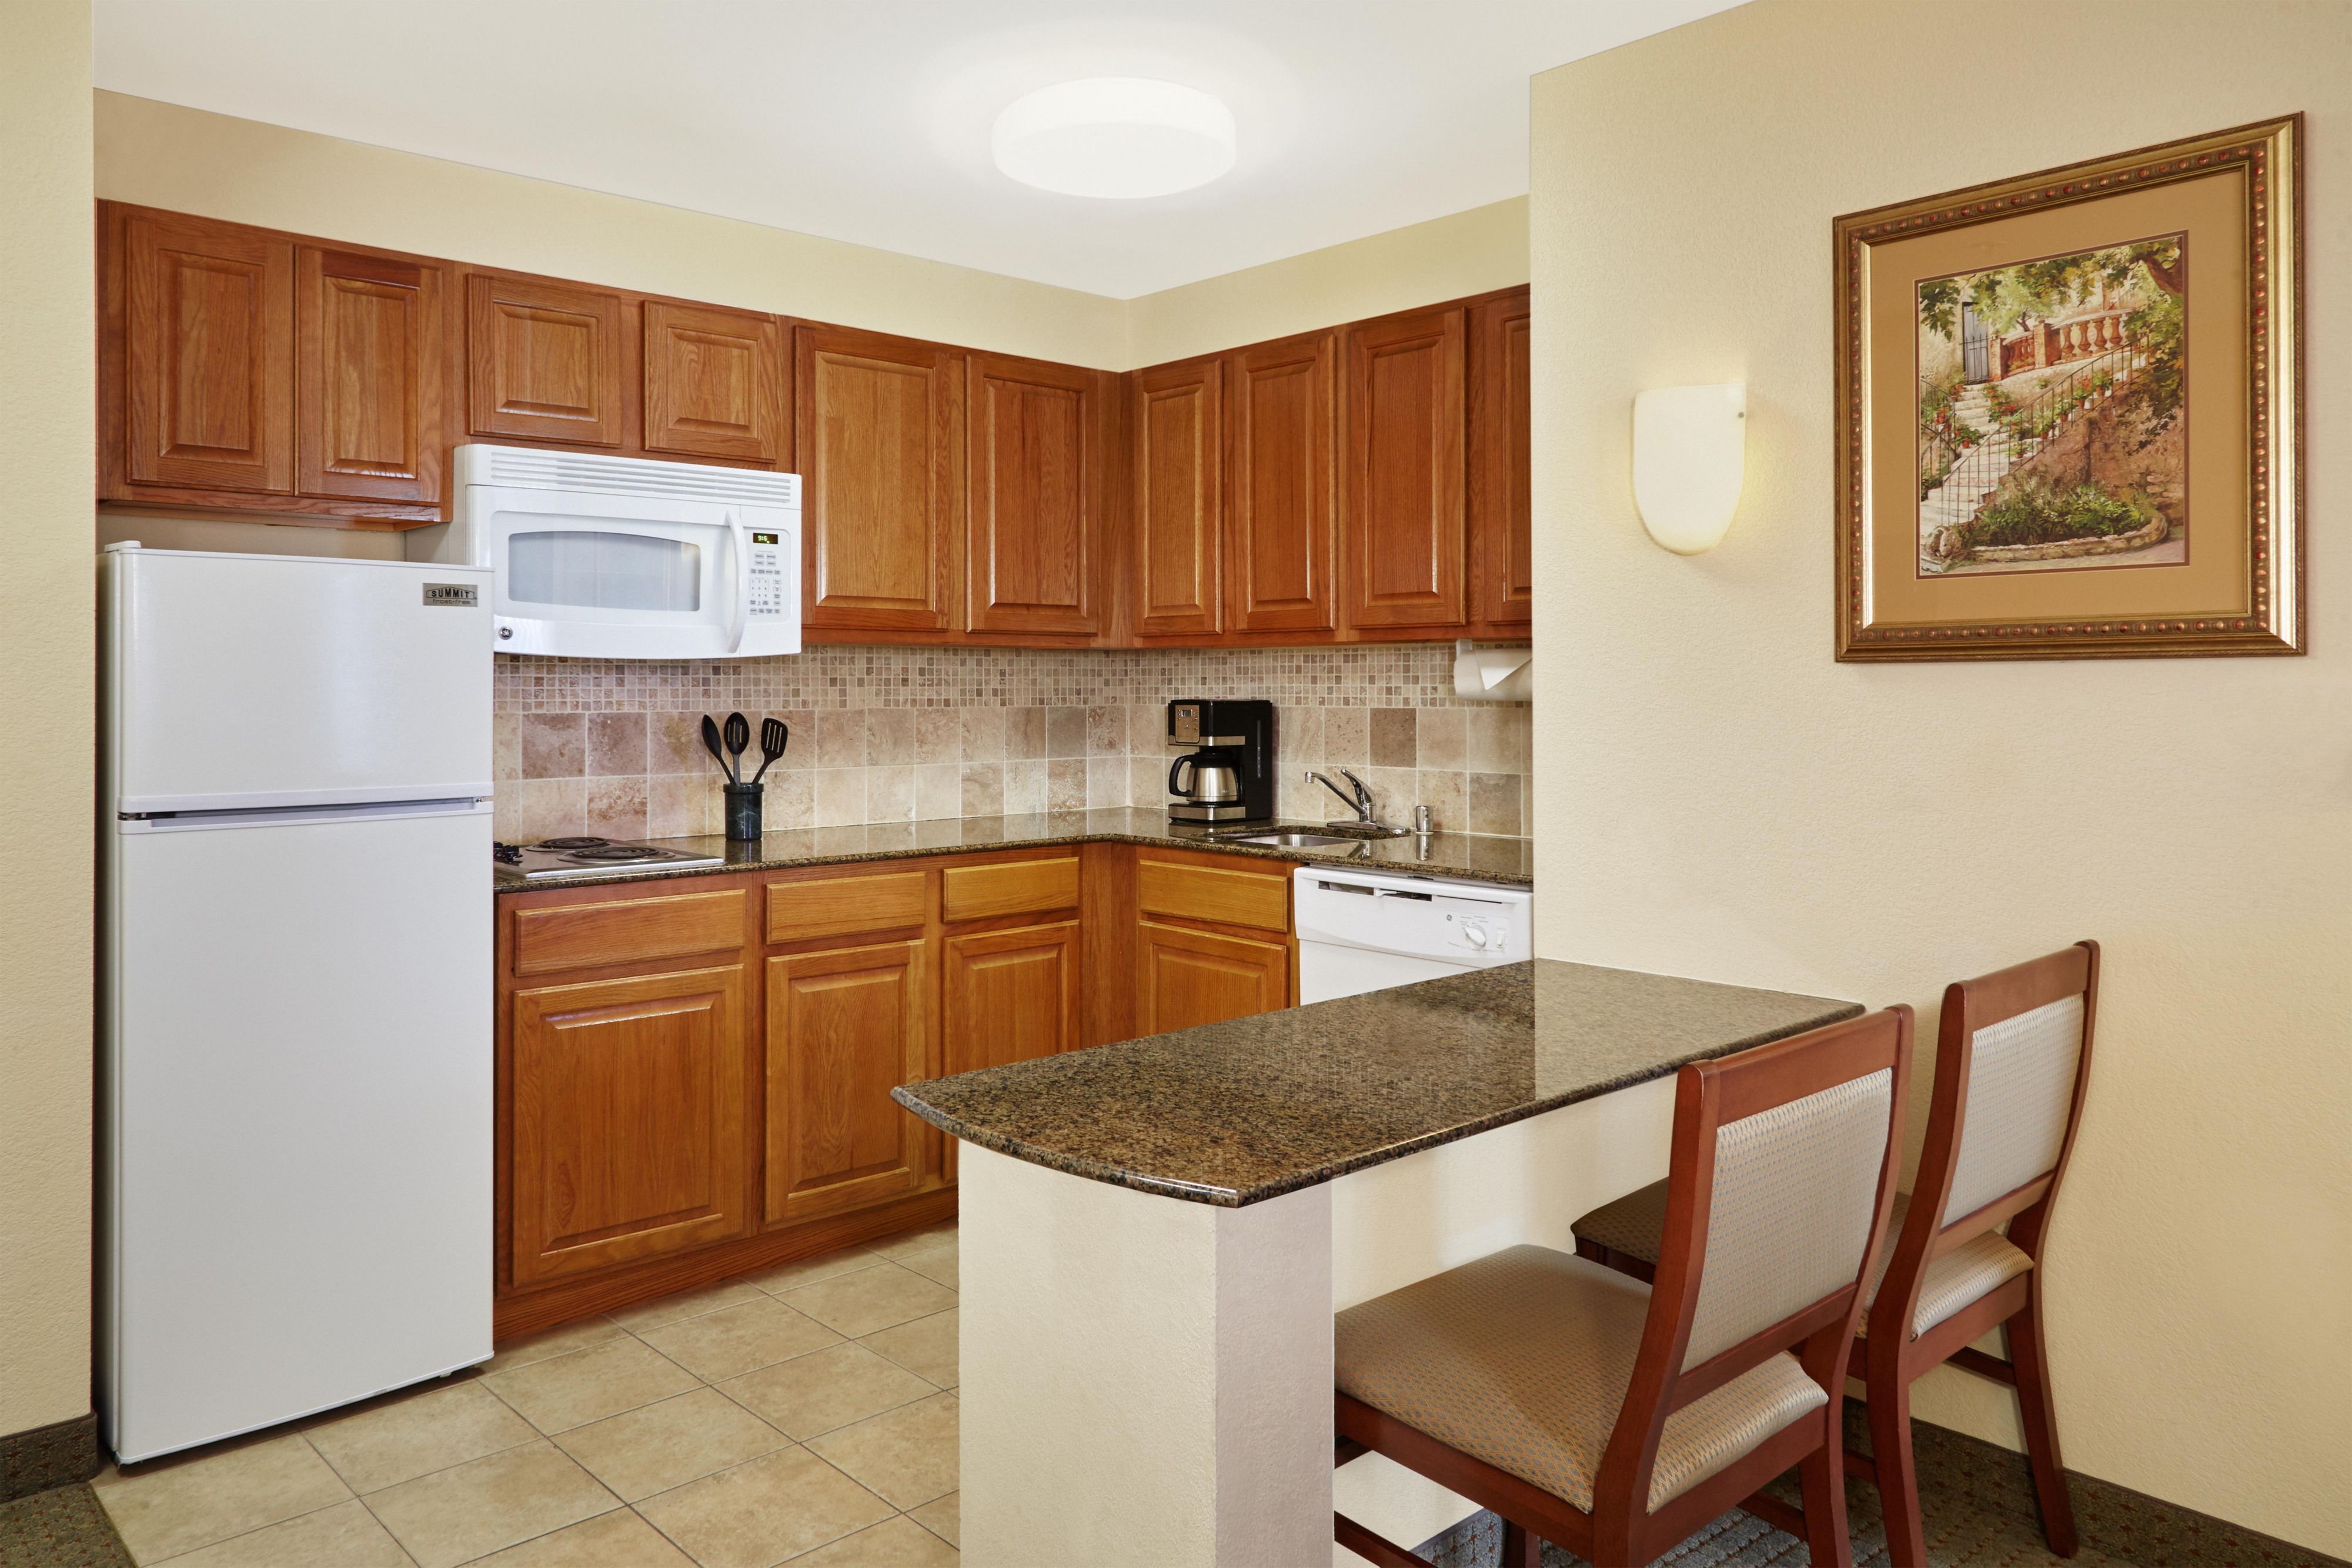 Fully equipped kitchens in each room allow guests the flexibility to cook their own meals, complete with a two burner stovetop, microwave, full-size refrigerator and dishwasher.